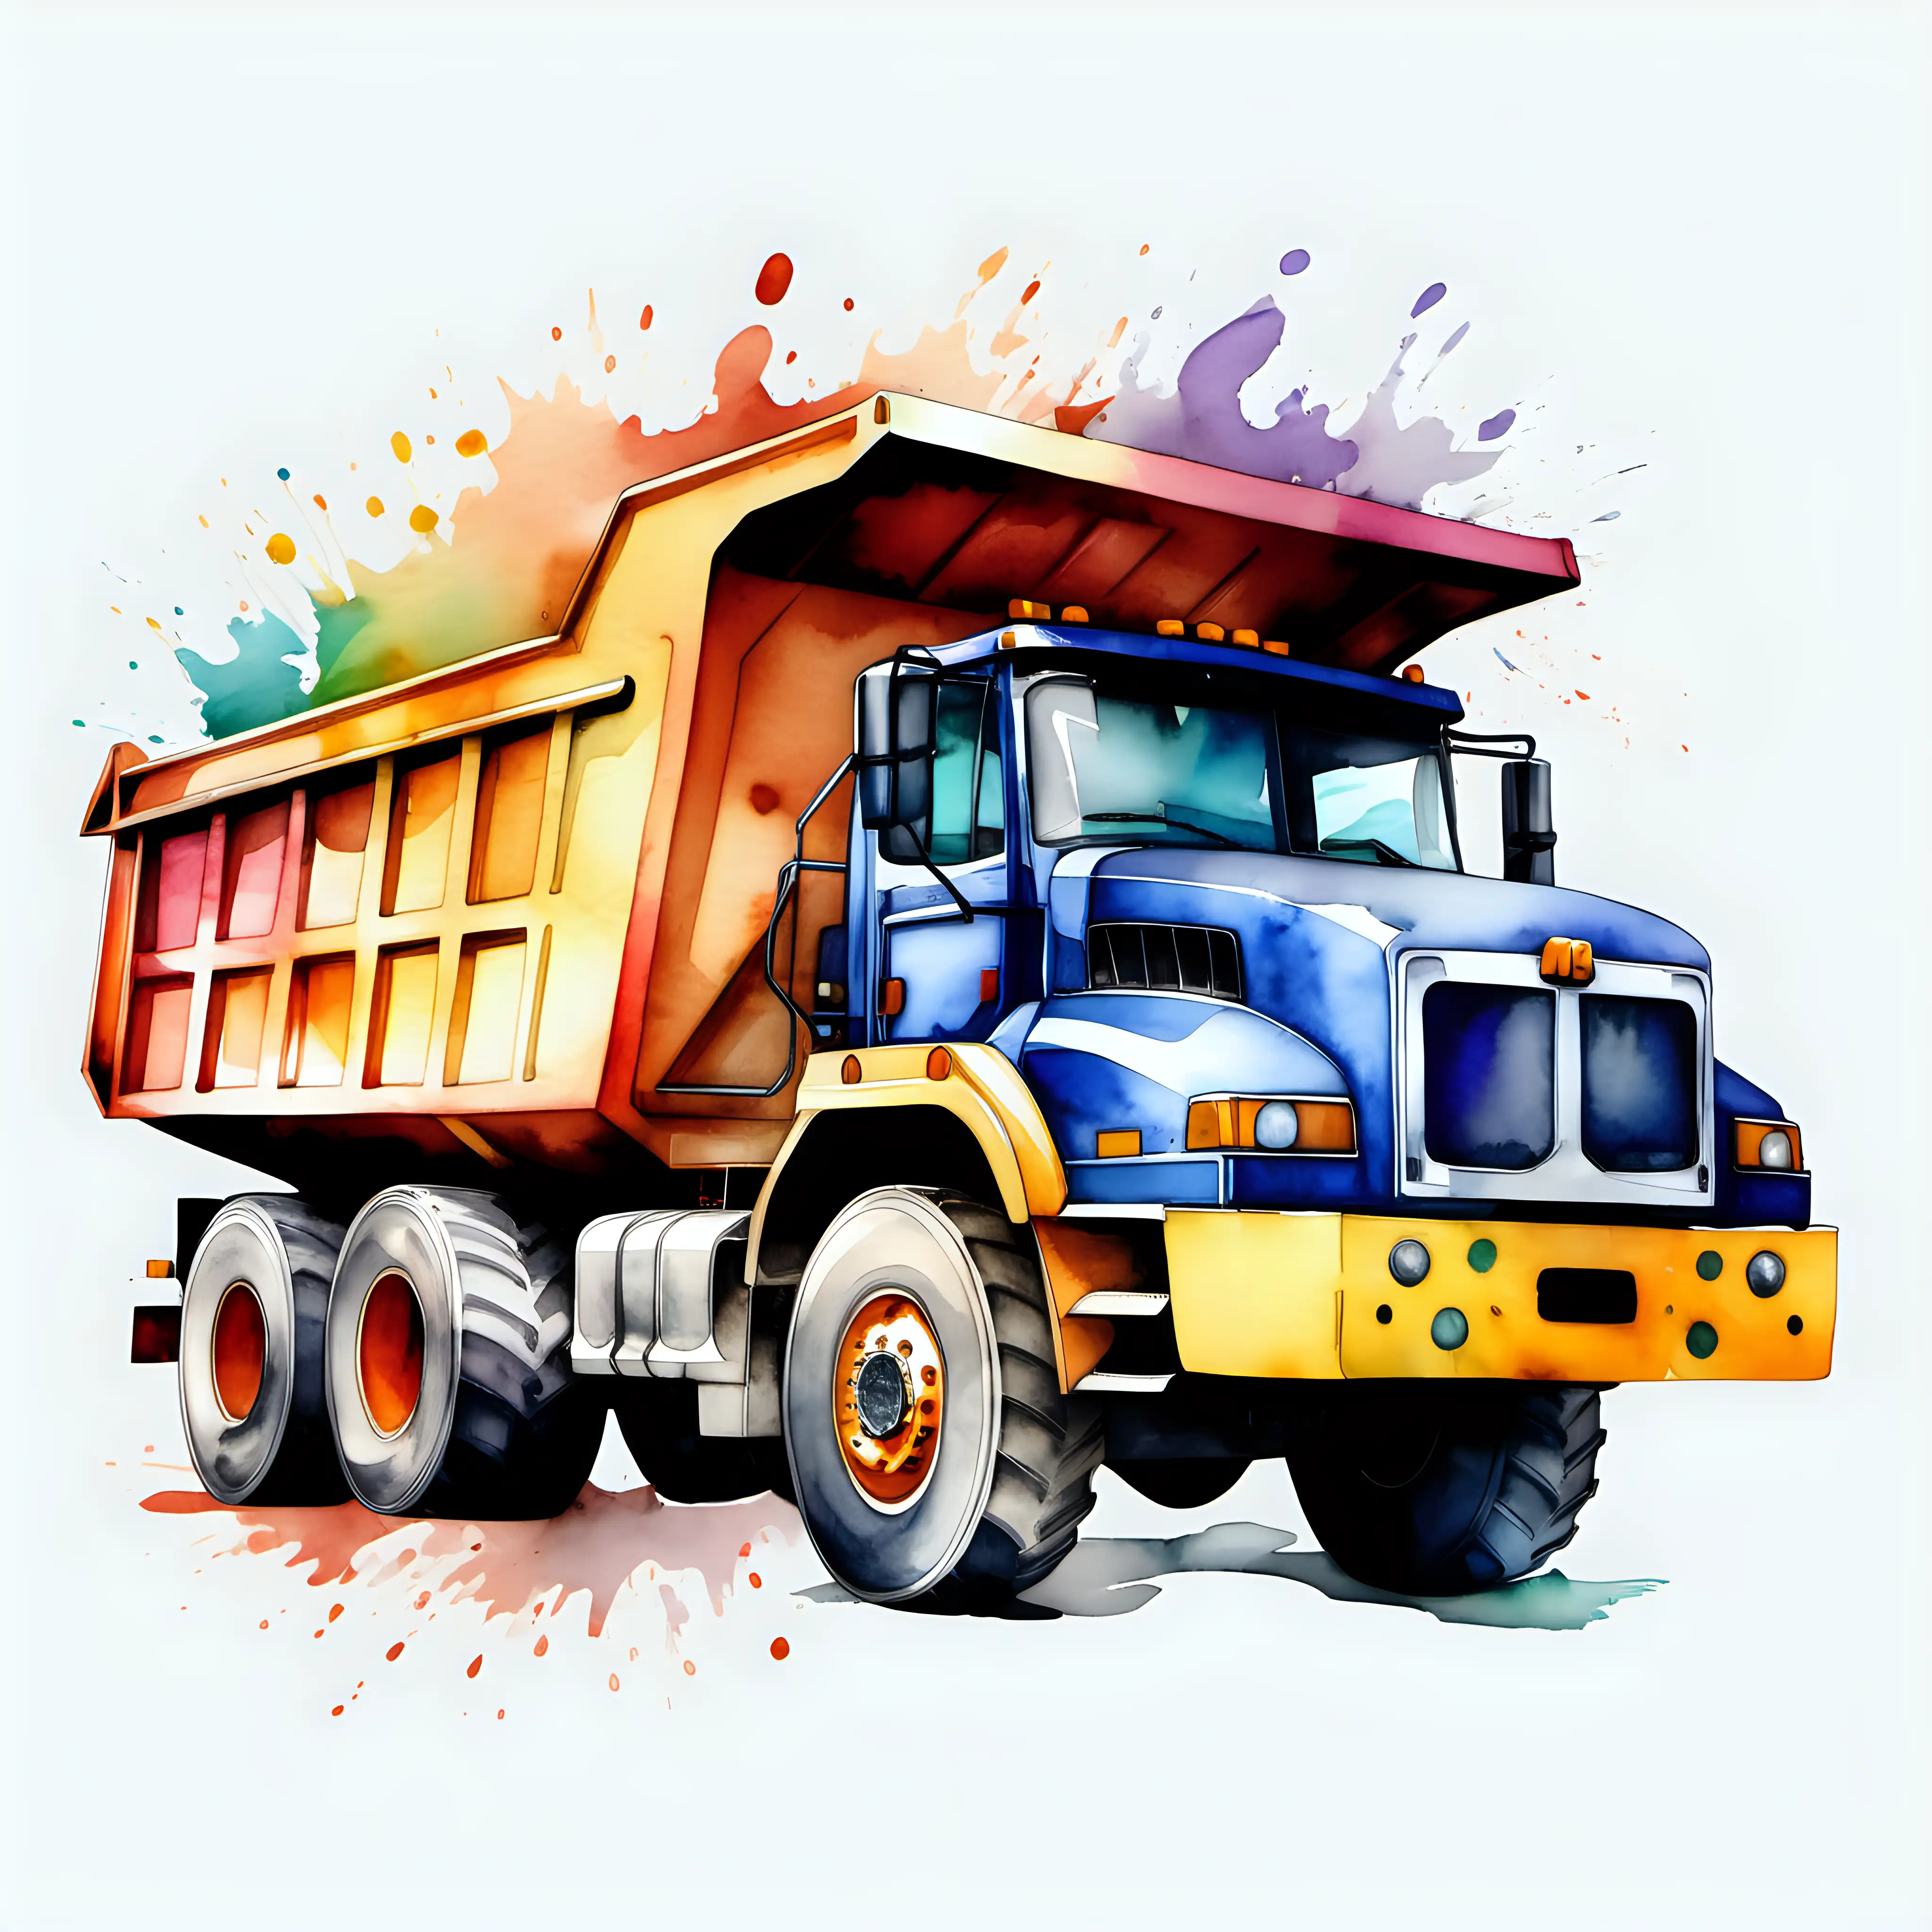 Multicolor watercolor dump truck with clear background

